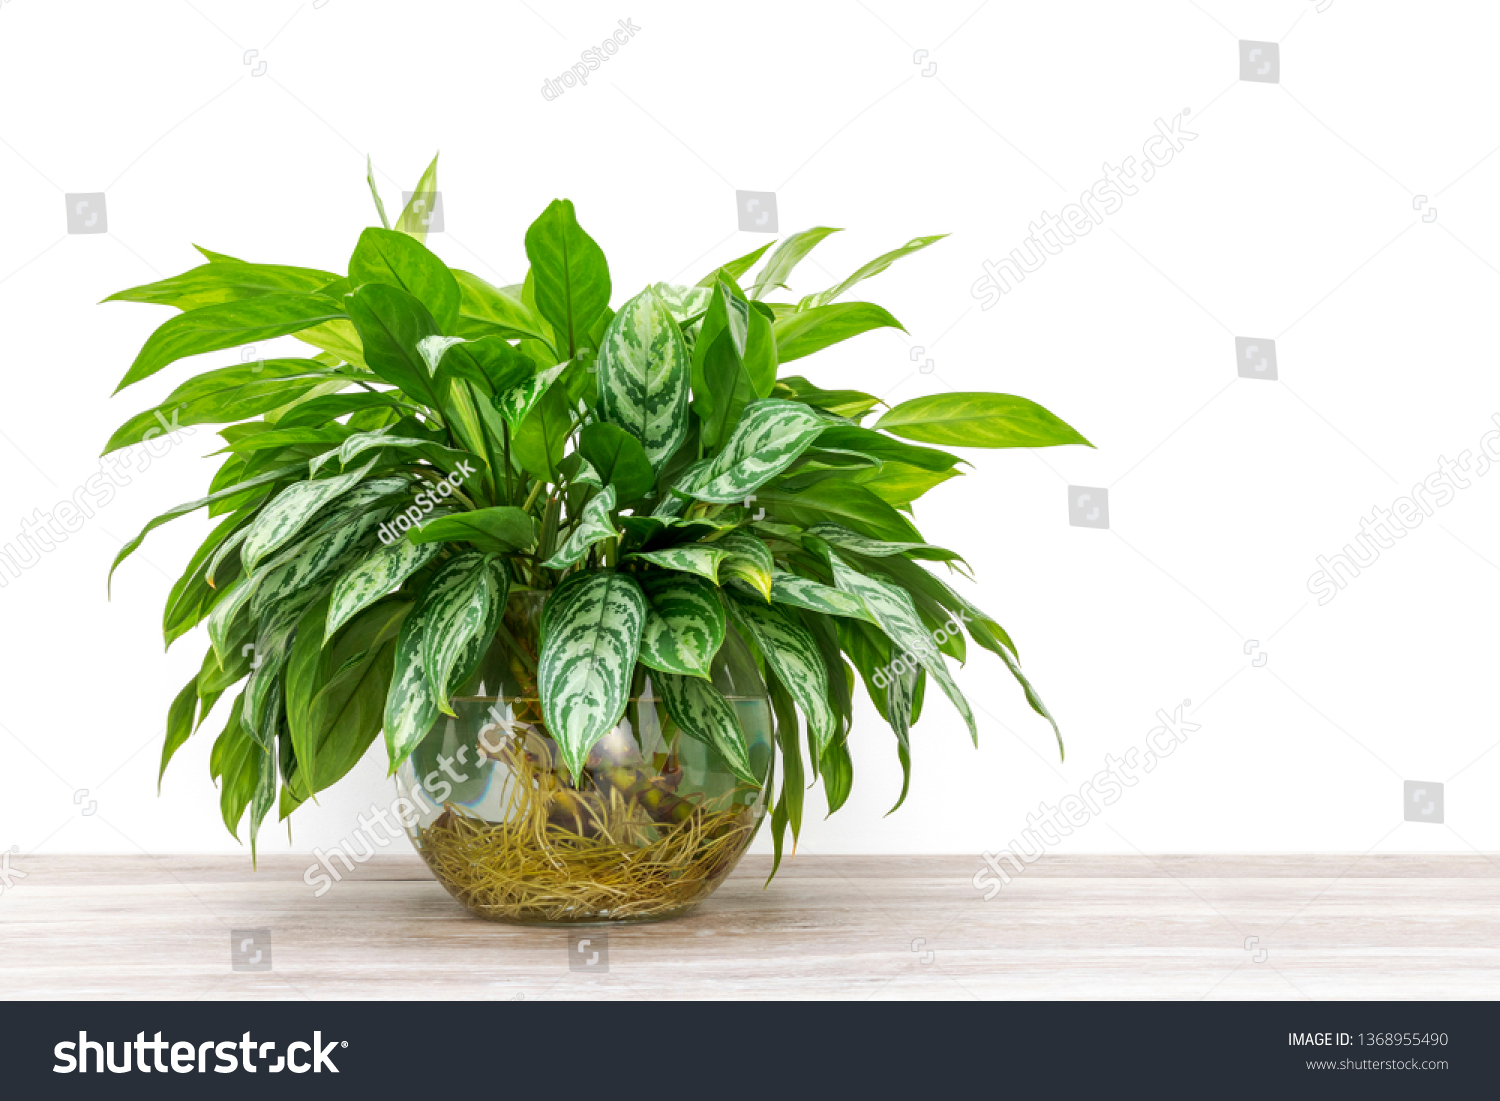 bunch of green houseplant cuttings, Aglaonema, rooting and growing in a large glass vase #1368955490